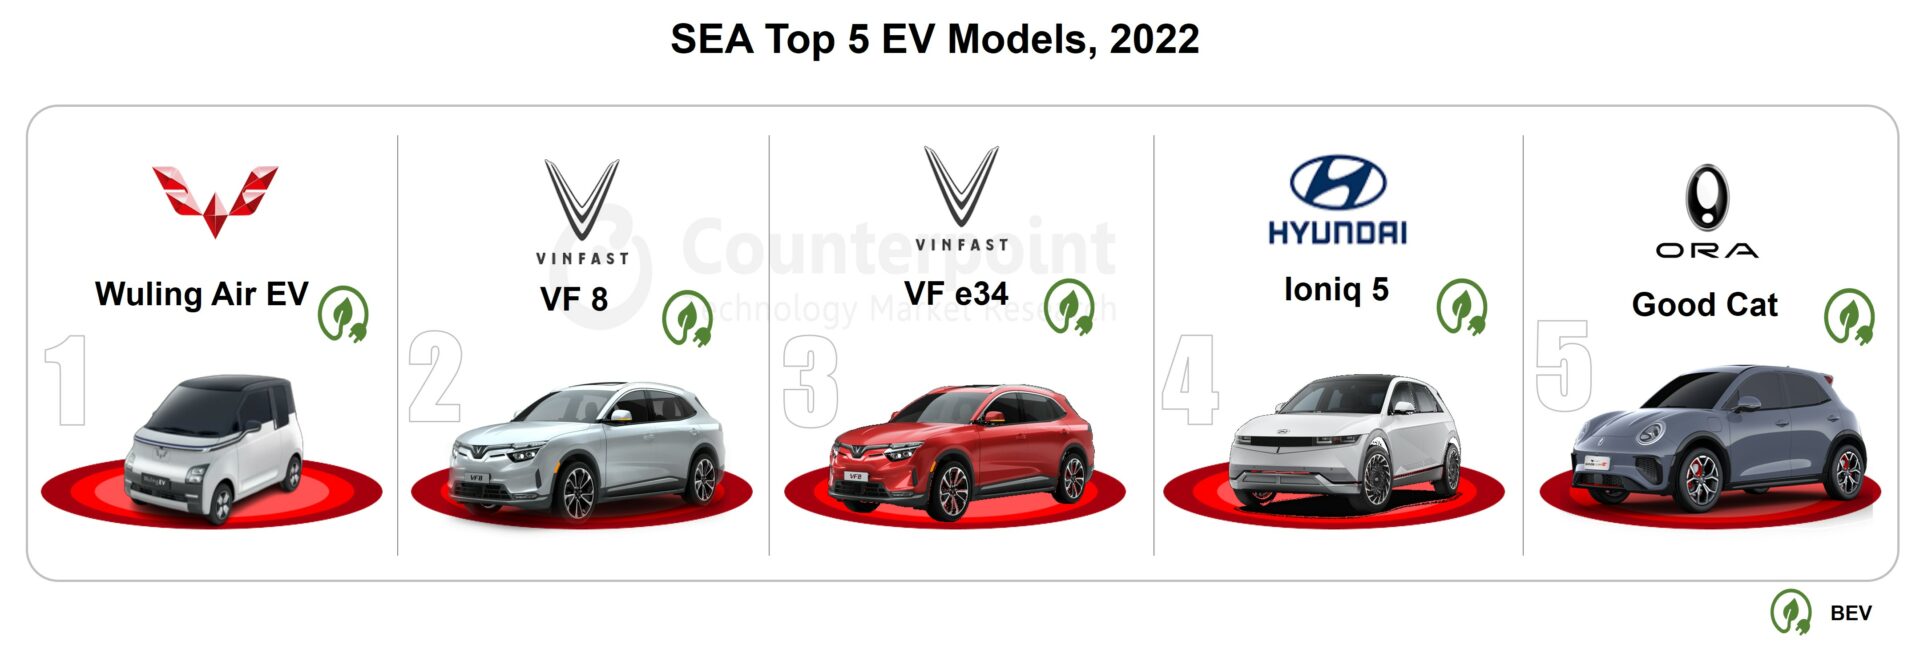 SEA top 5 EVs_2022_Counterpoint